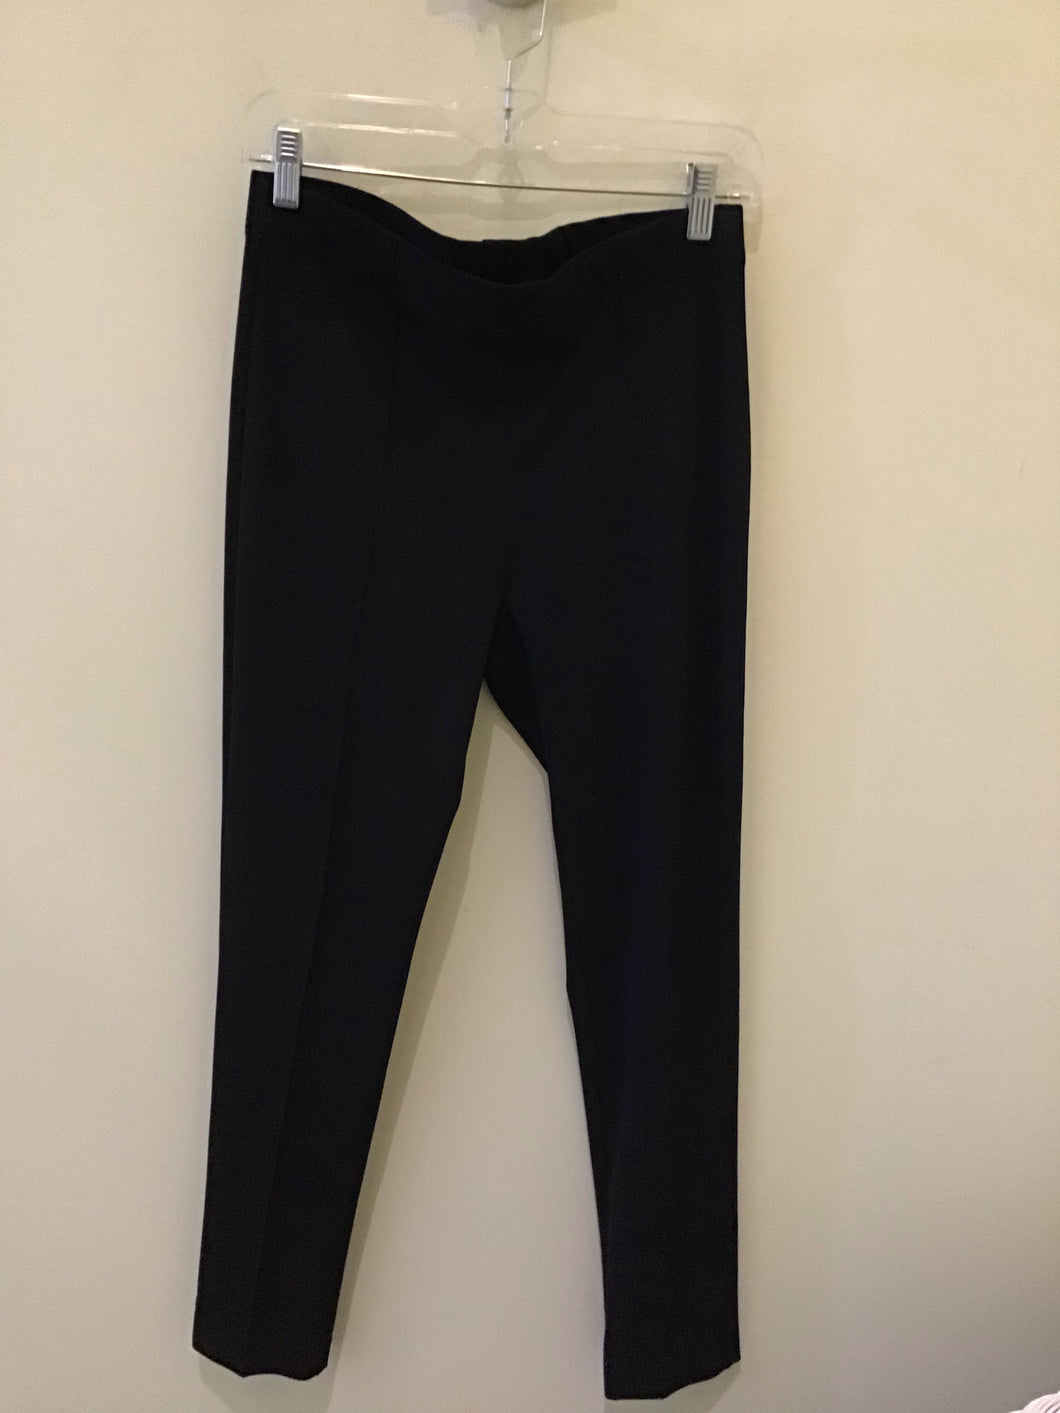 Pull on Suede Pant in Black by Estelle and Finn